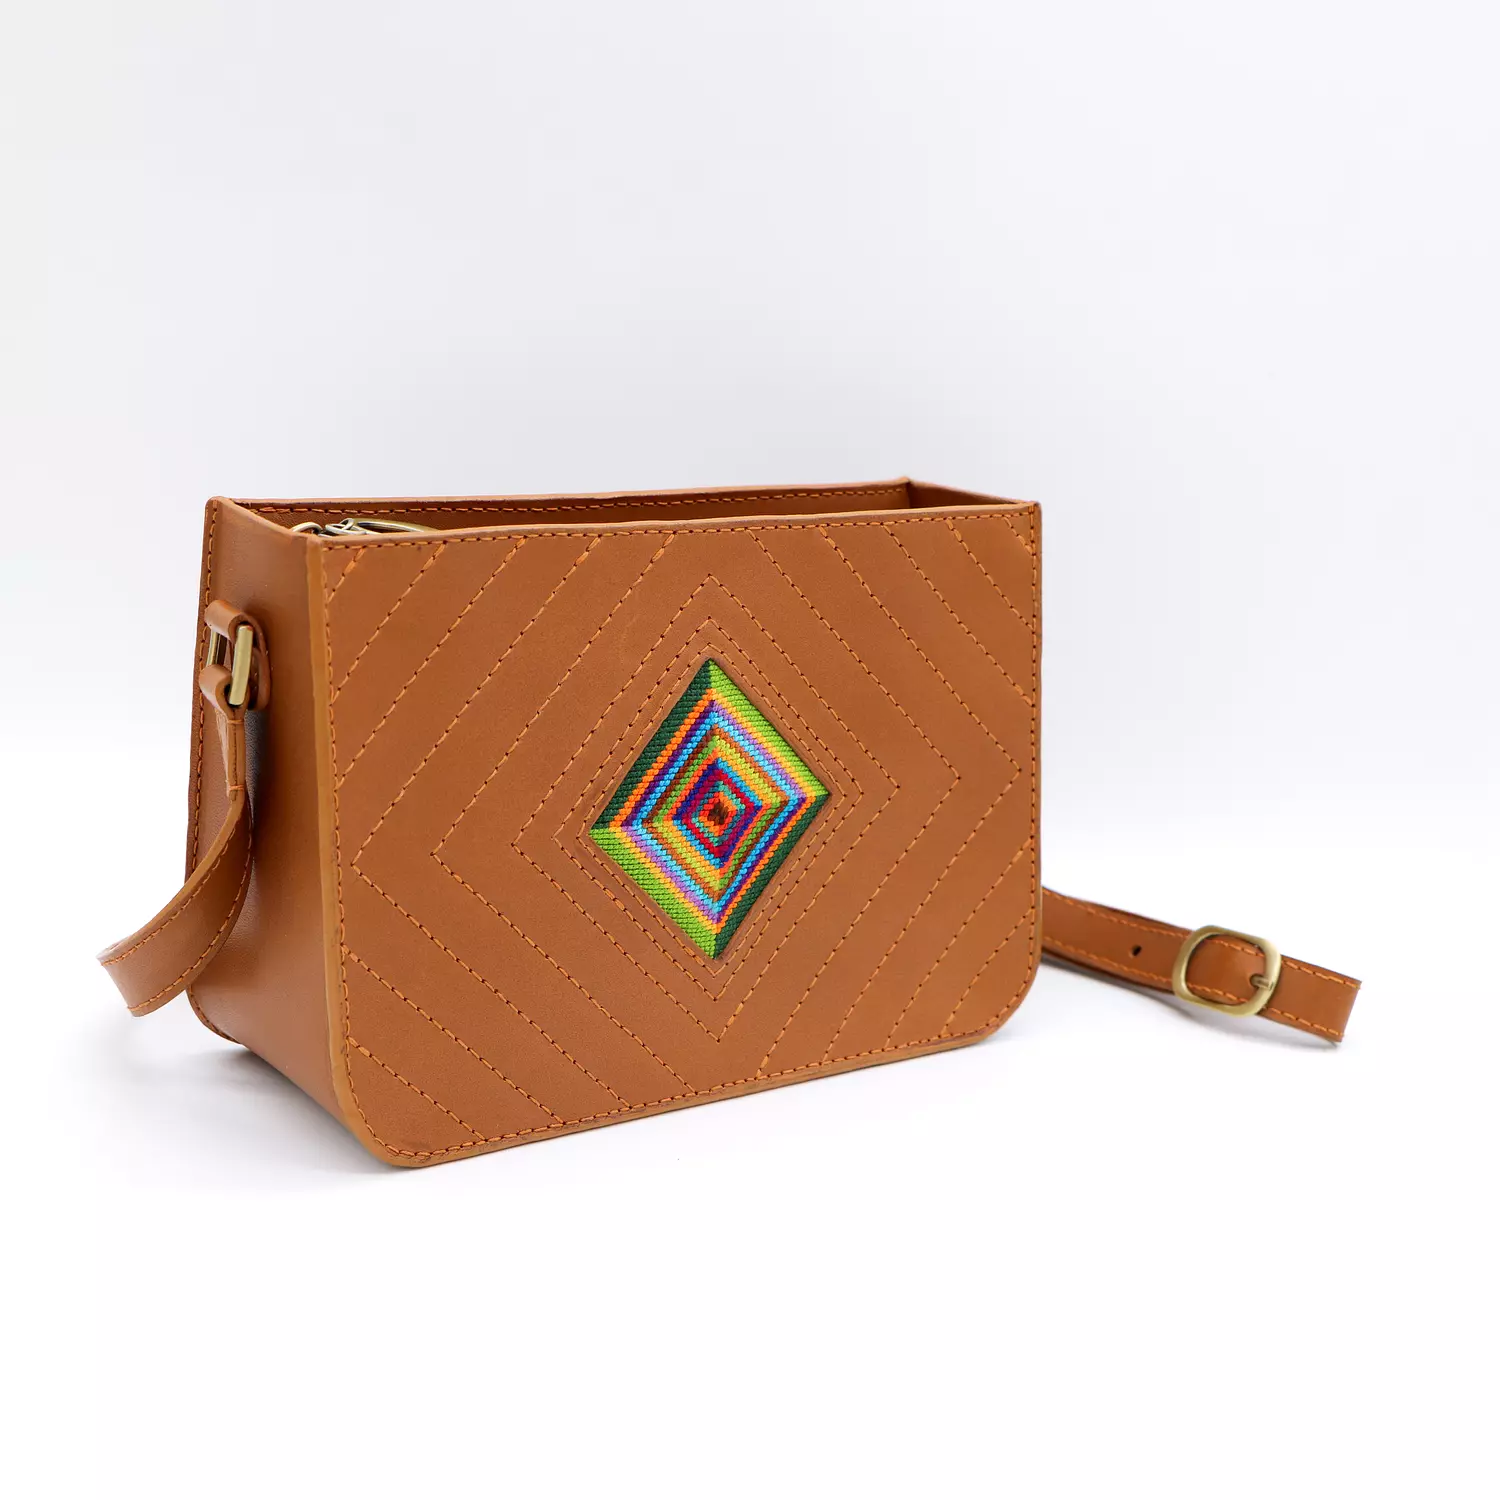 Genuine leather bag with colorful Cross-stitching 1